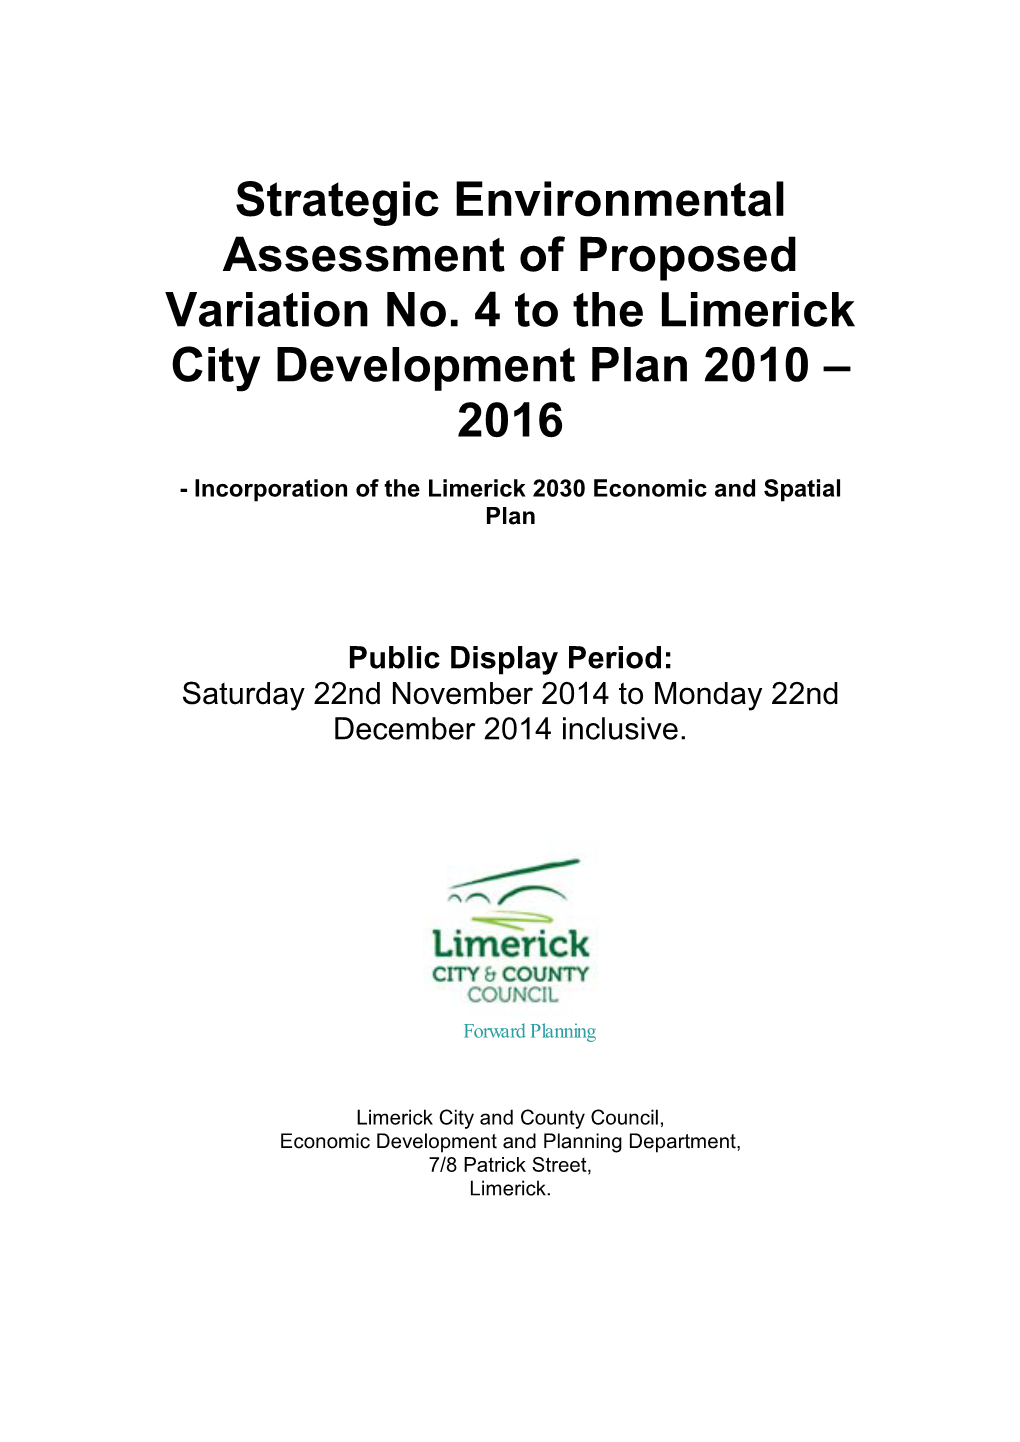 Strategic Environmental Assessment Report-Incorporation of the Limerick 2030 Economic and Spatial Plan